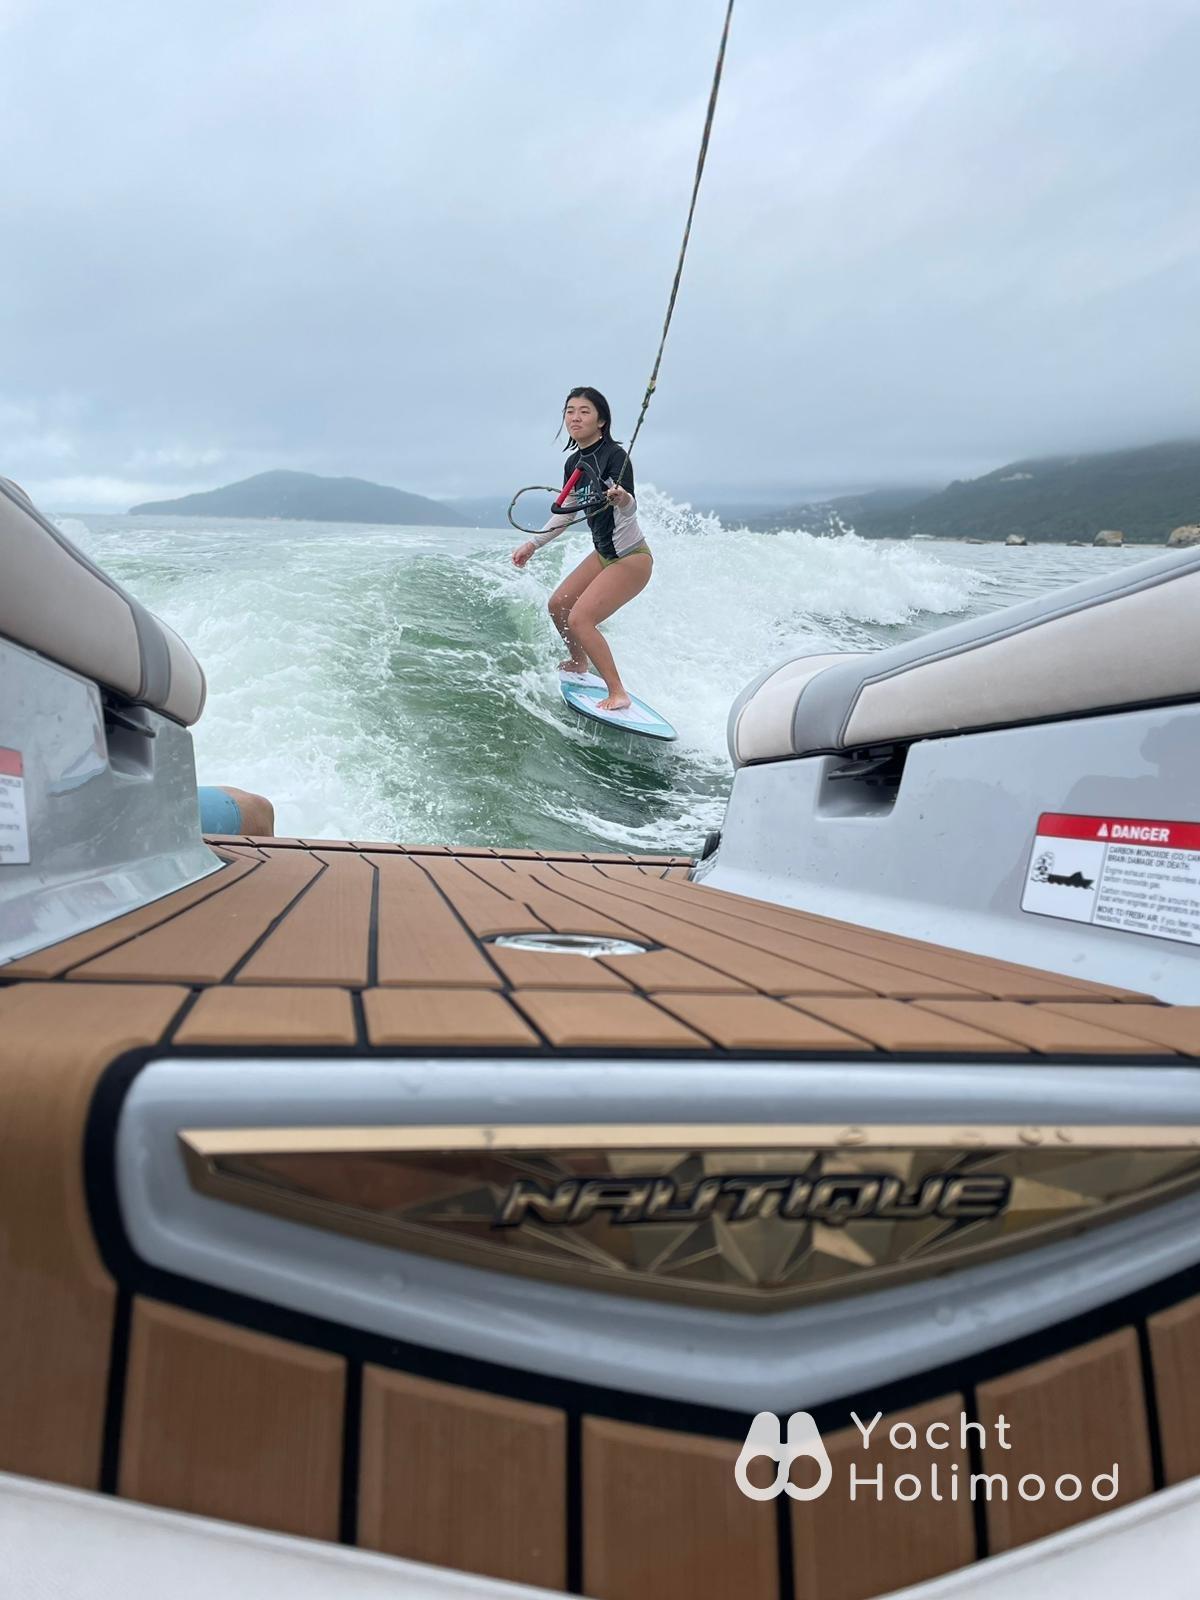 DD02 [2 hours or above] Rare NautiqueG23 Wakesurf in Lantau Island! Direct Onboard from Cheung Sha 25